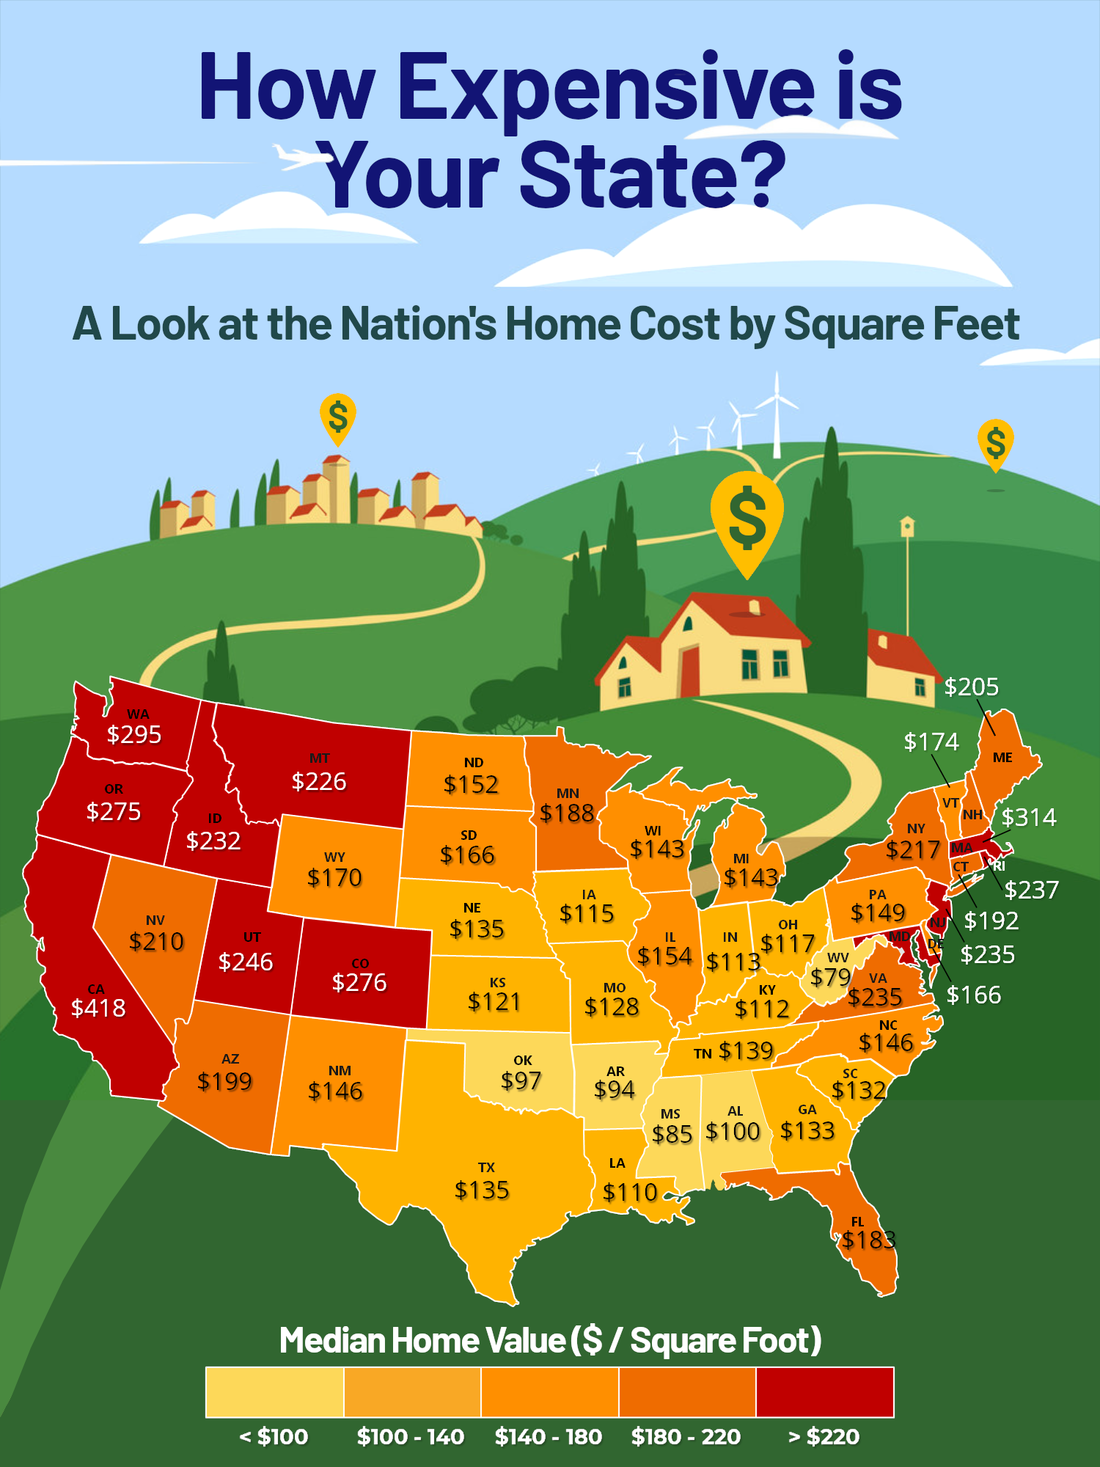 Map of Median Home Value per Square Foot by State